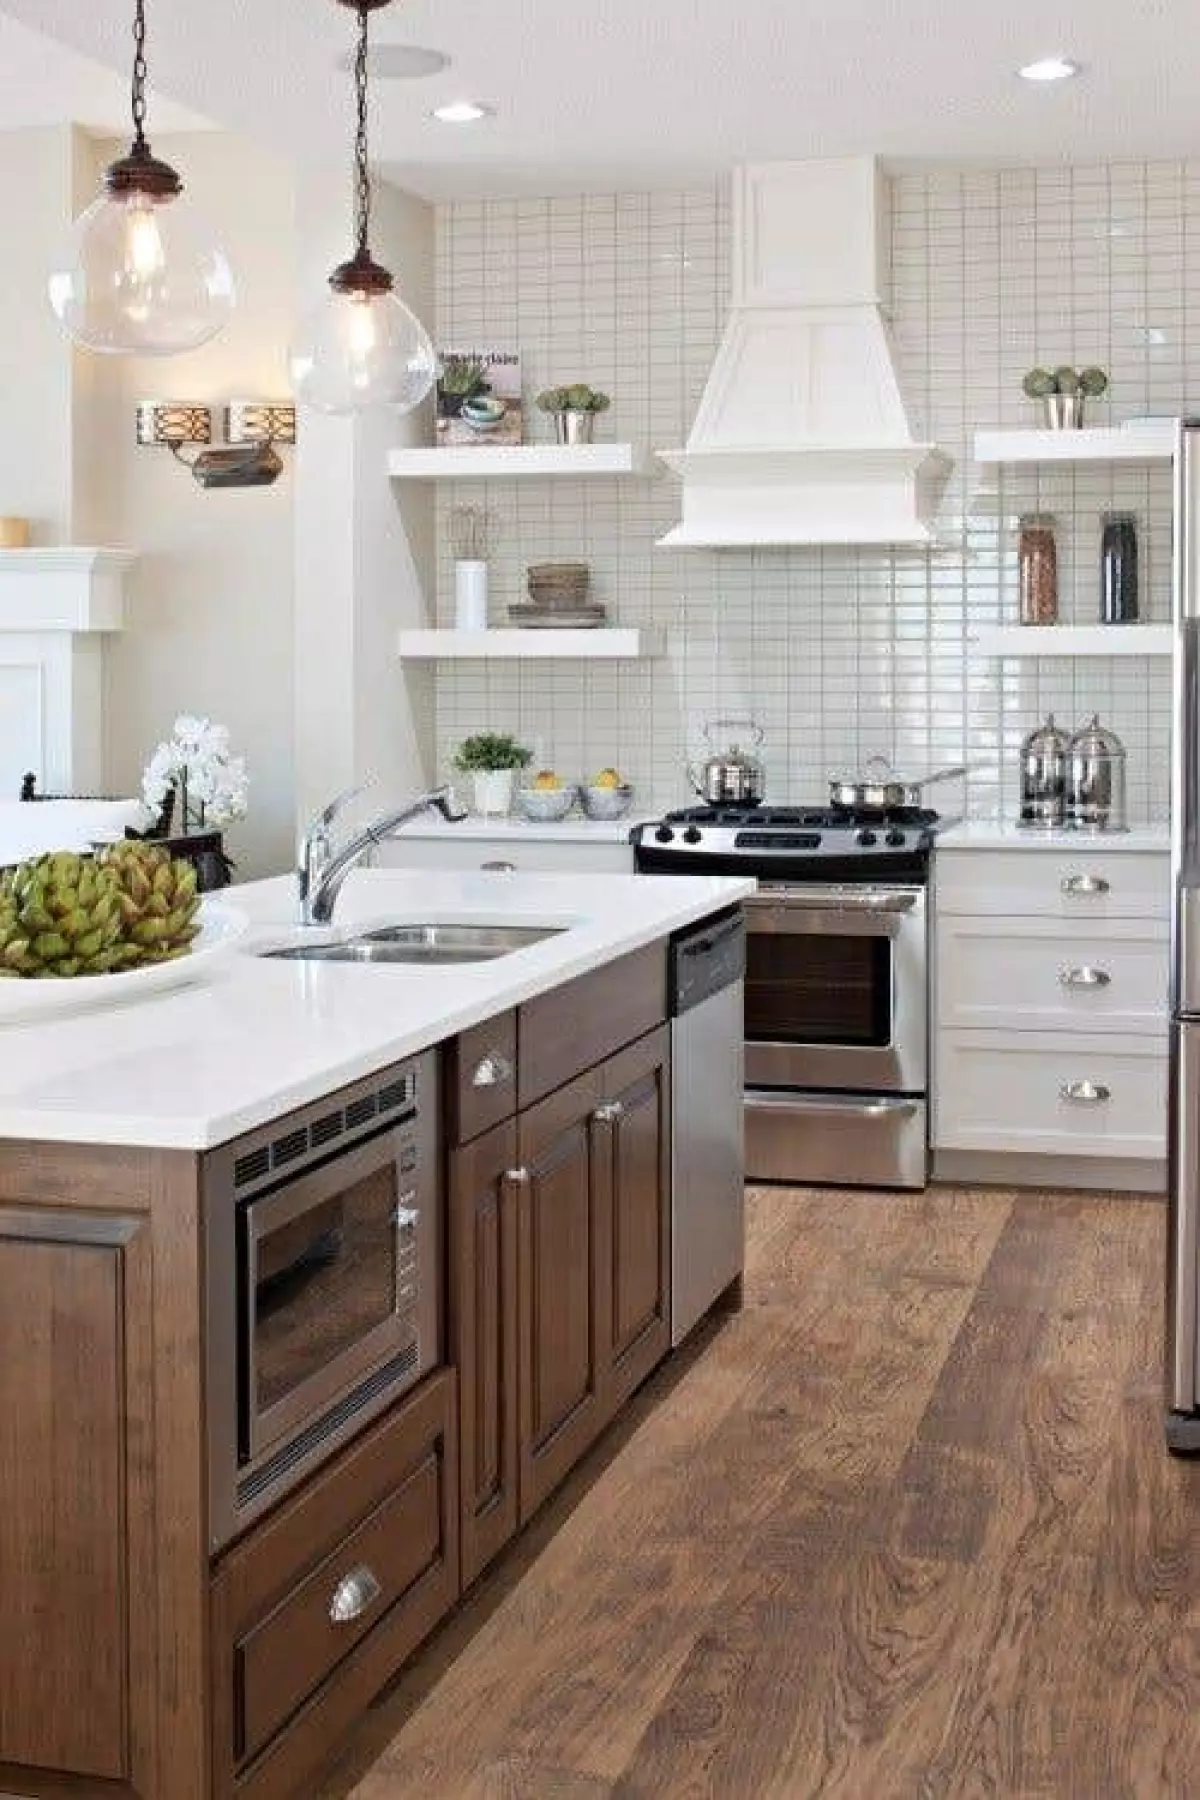 Kitchen Design Features White Cabinets and Microwave Cabinet Built-in in Island